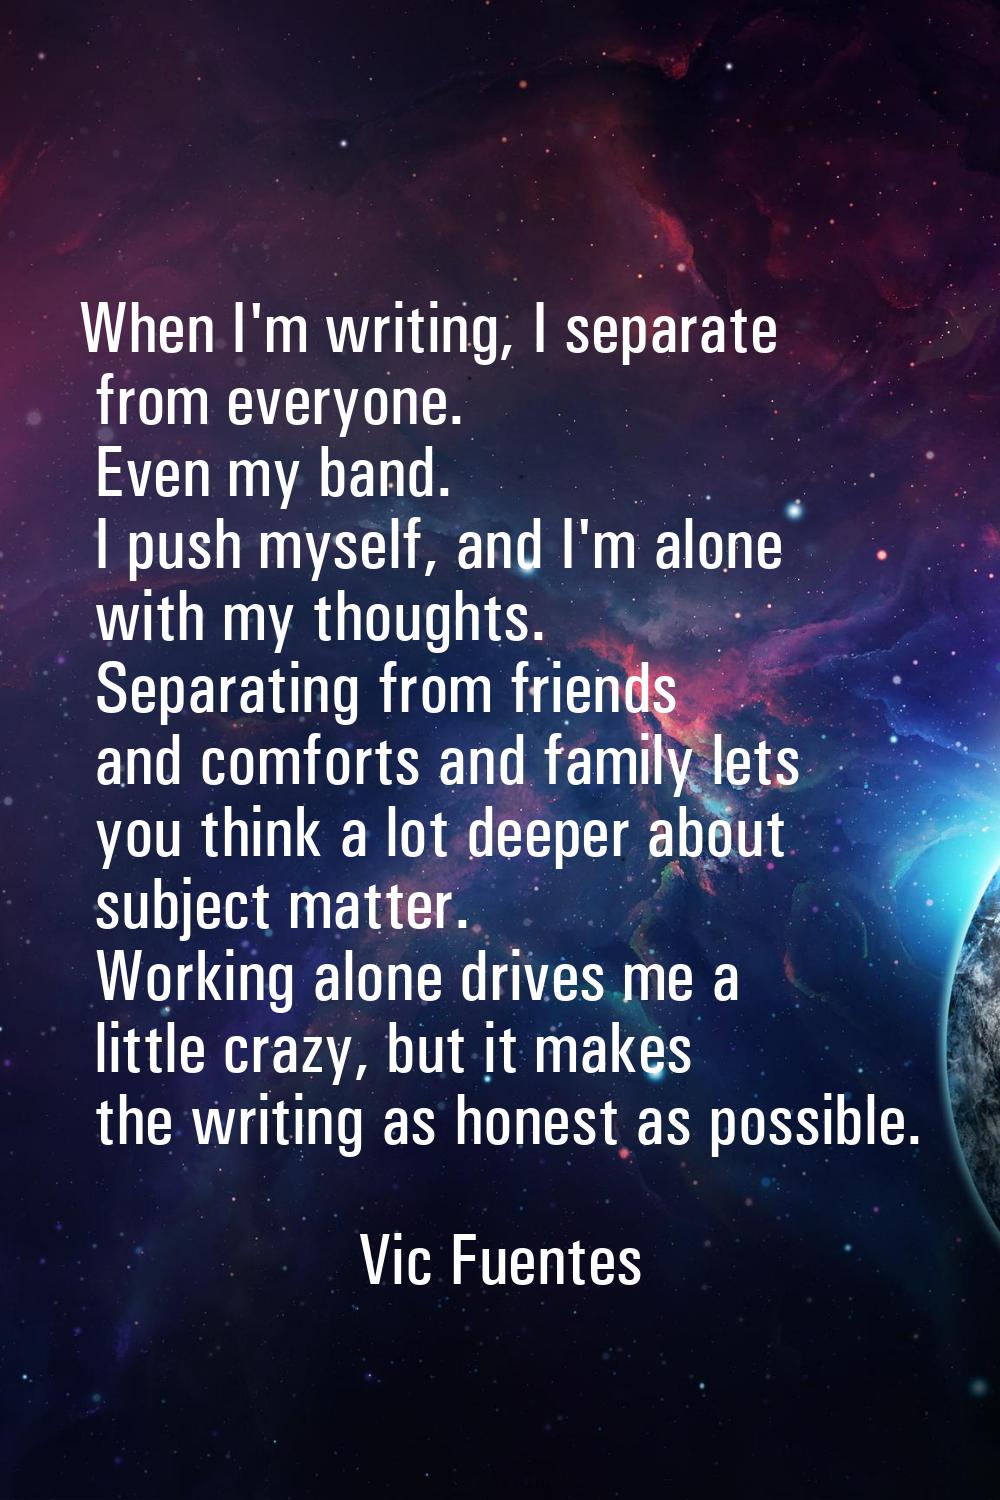 When I'm writing, I separate from everyone. Even my band. I push myself, and I'm alone with my thou